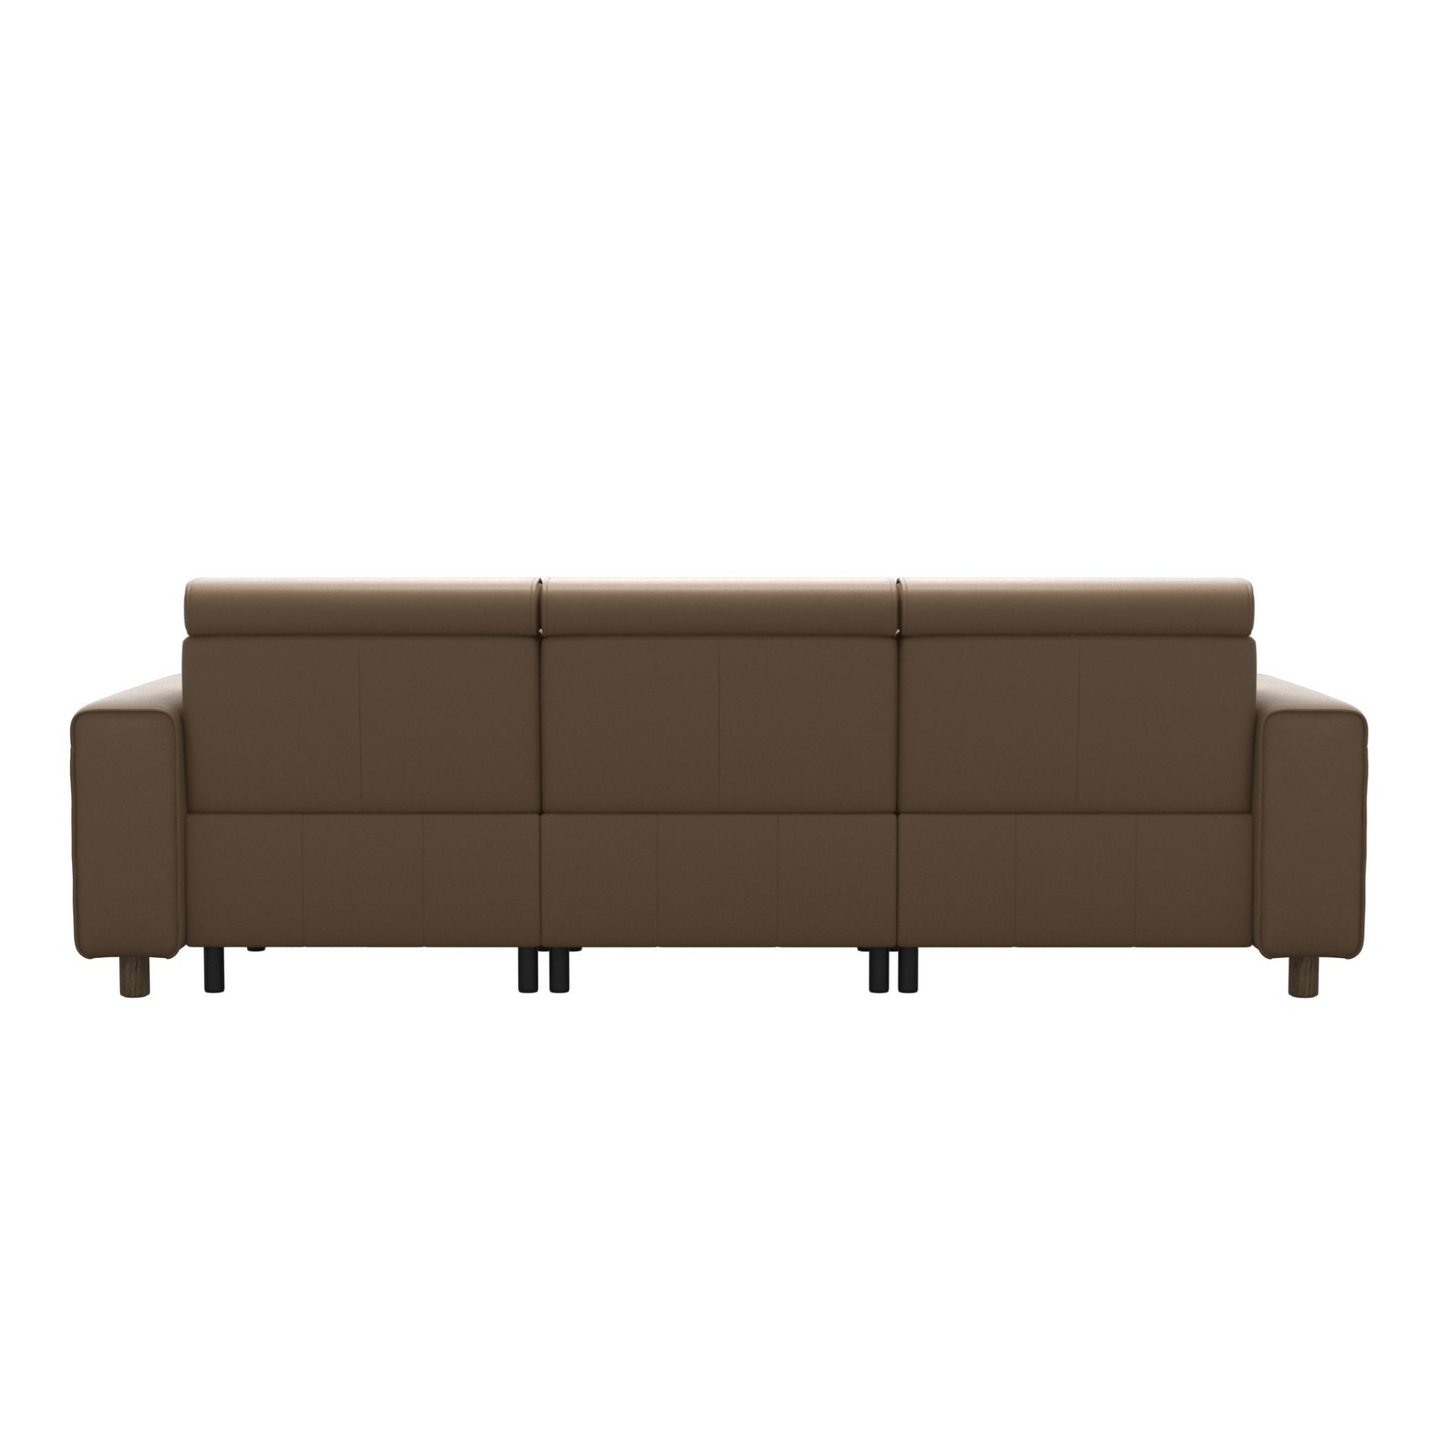 Emily Sofa with Wide Arm by Stressless